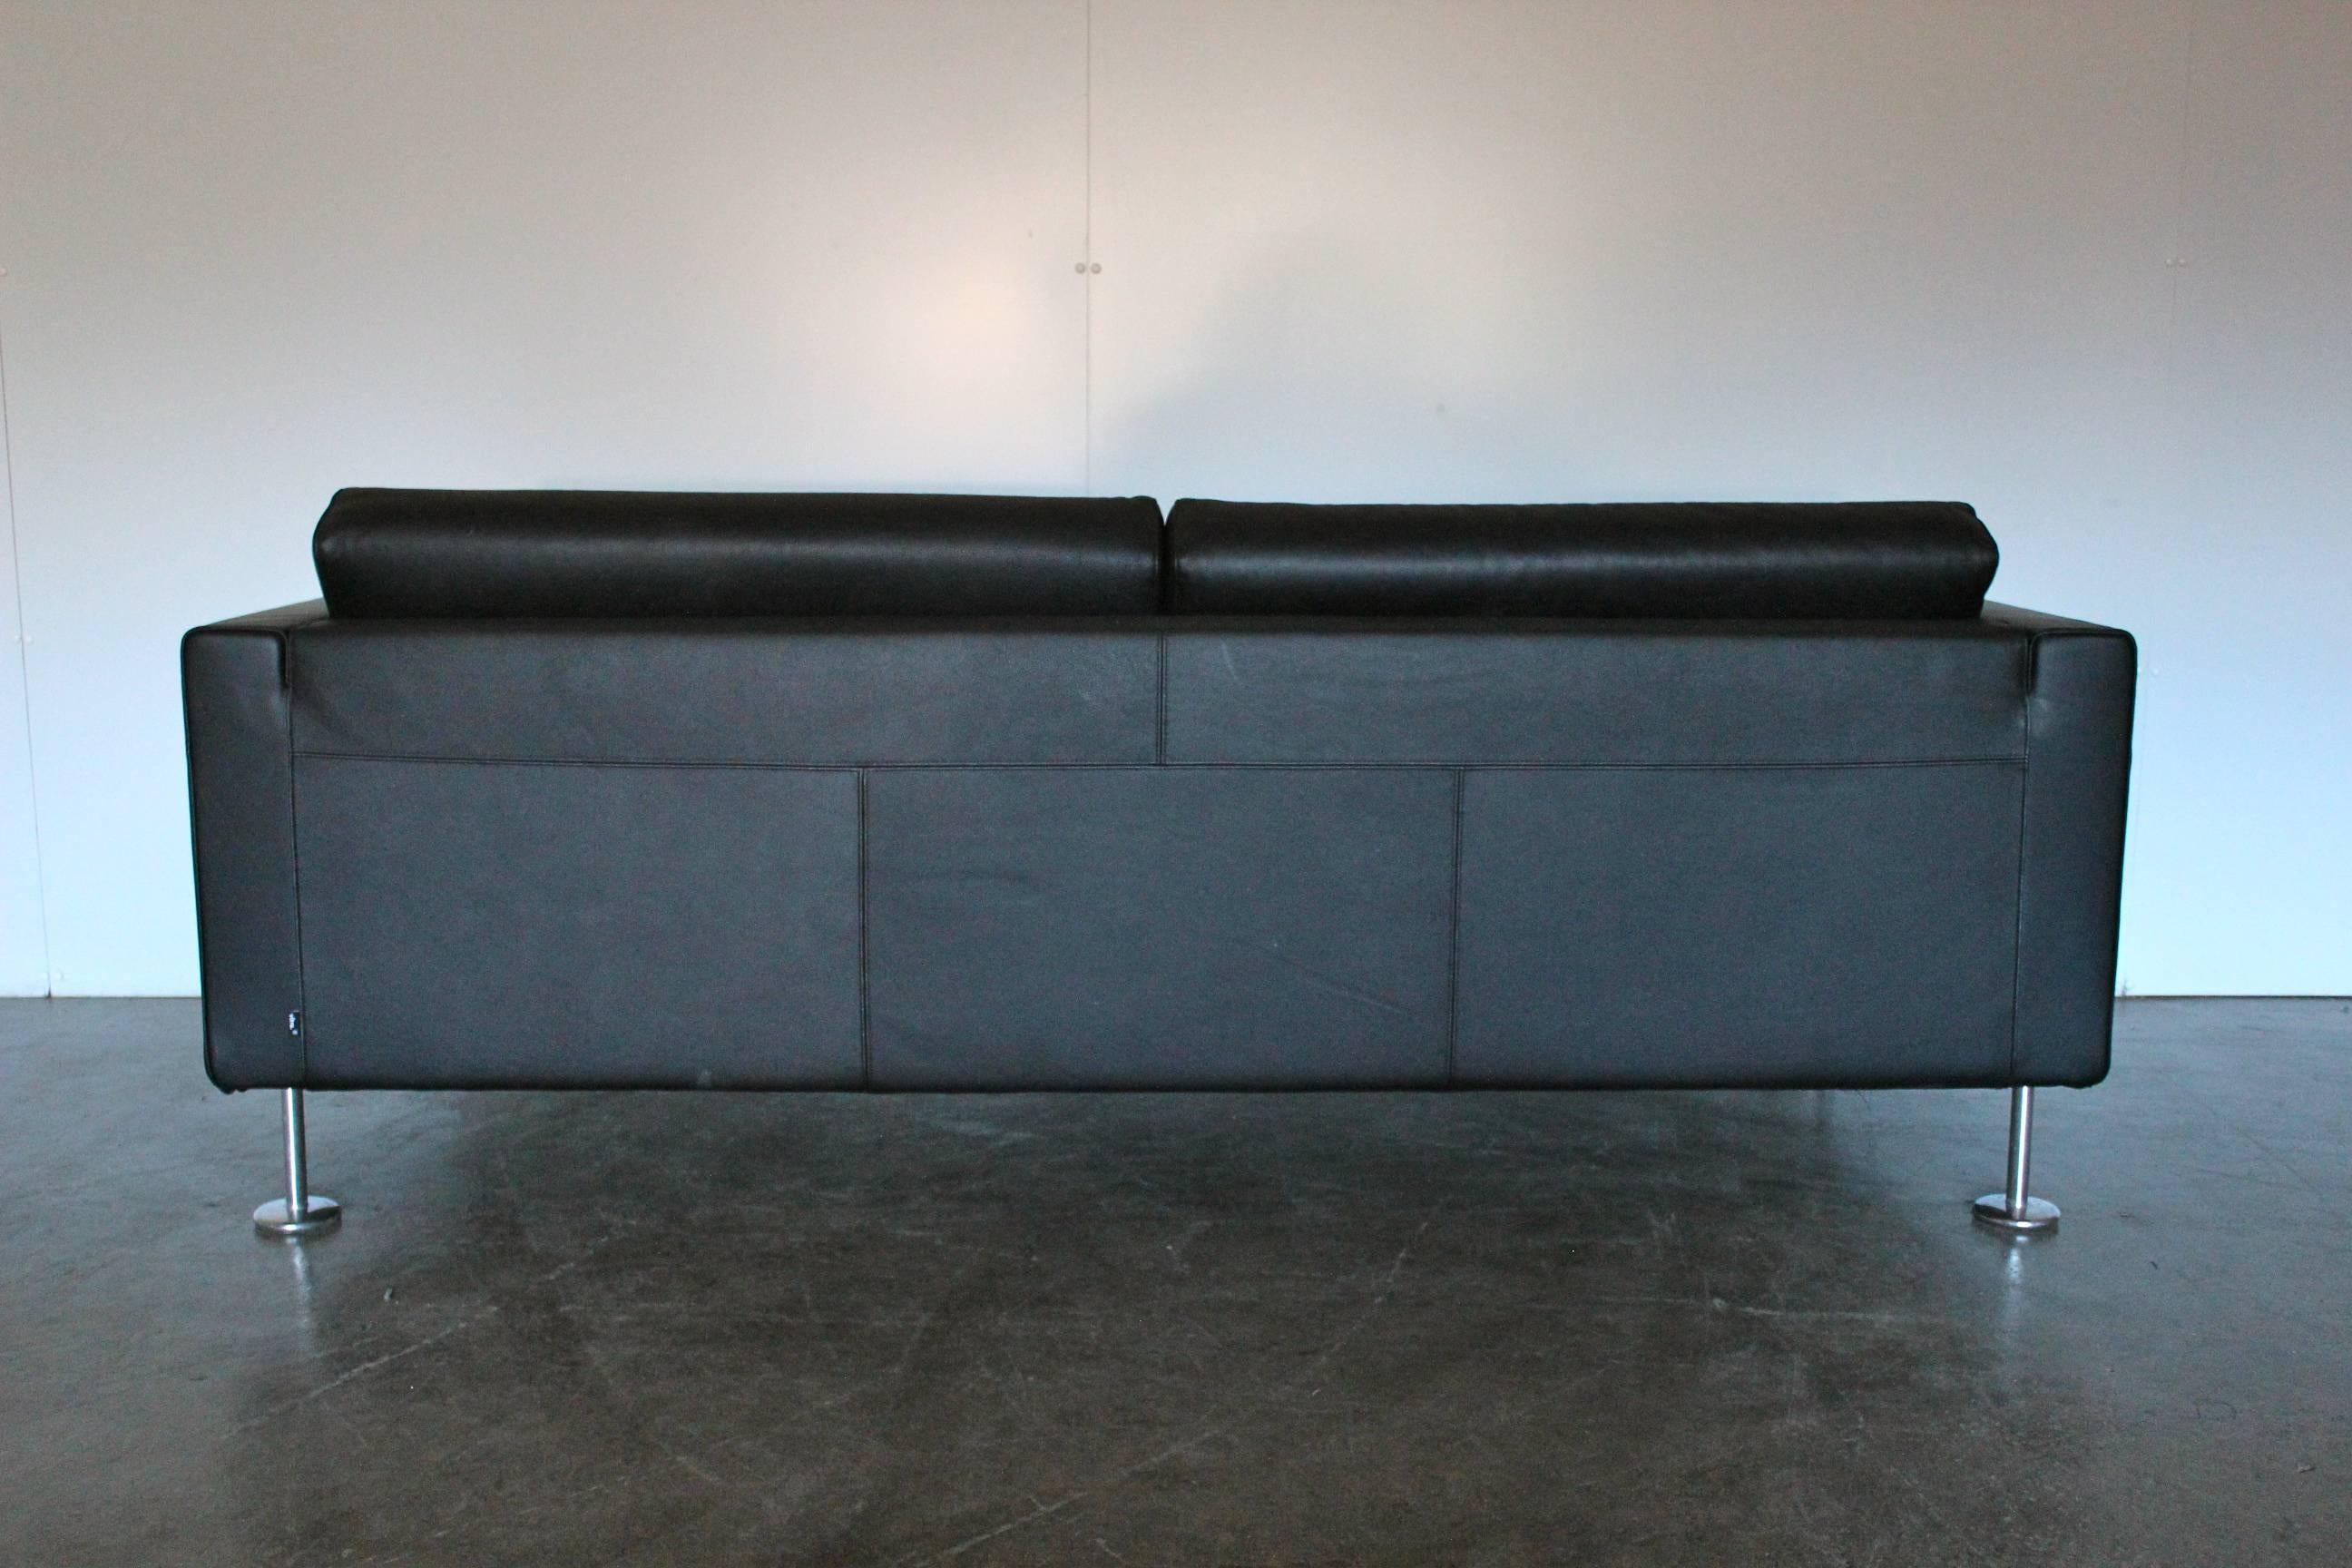 On offer on this occasion is an ultra-rare, pristine “Park” three-seat sofa (one of 2 identical examples currently available) dressed in a high-grade jet-black leather, from the world renown Swiss furniture house of Vitra.

As you will no doubt be